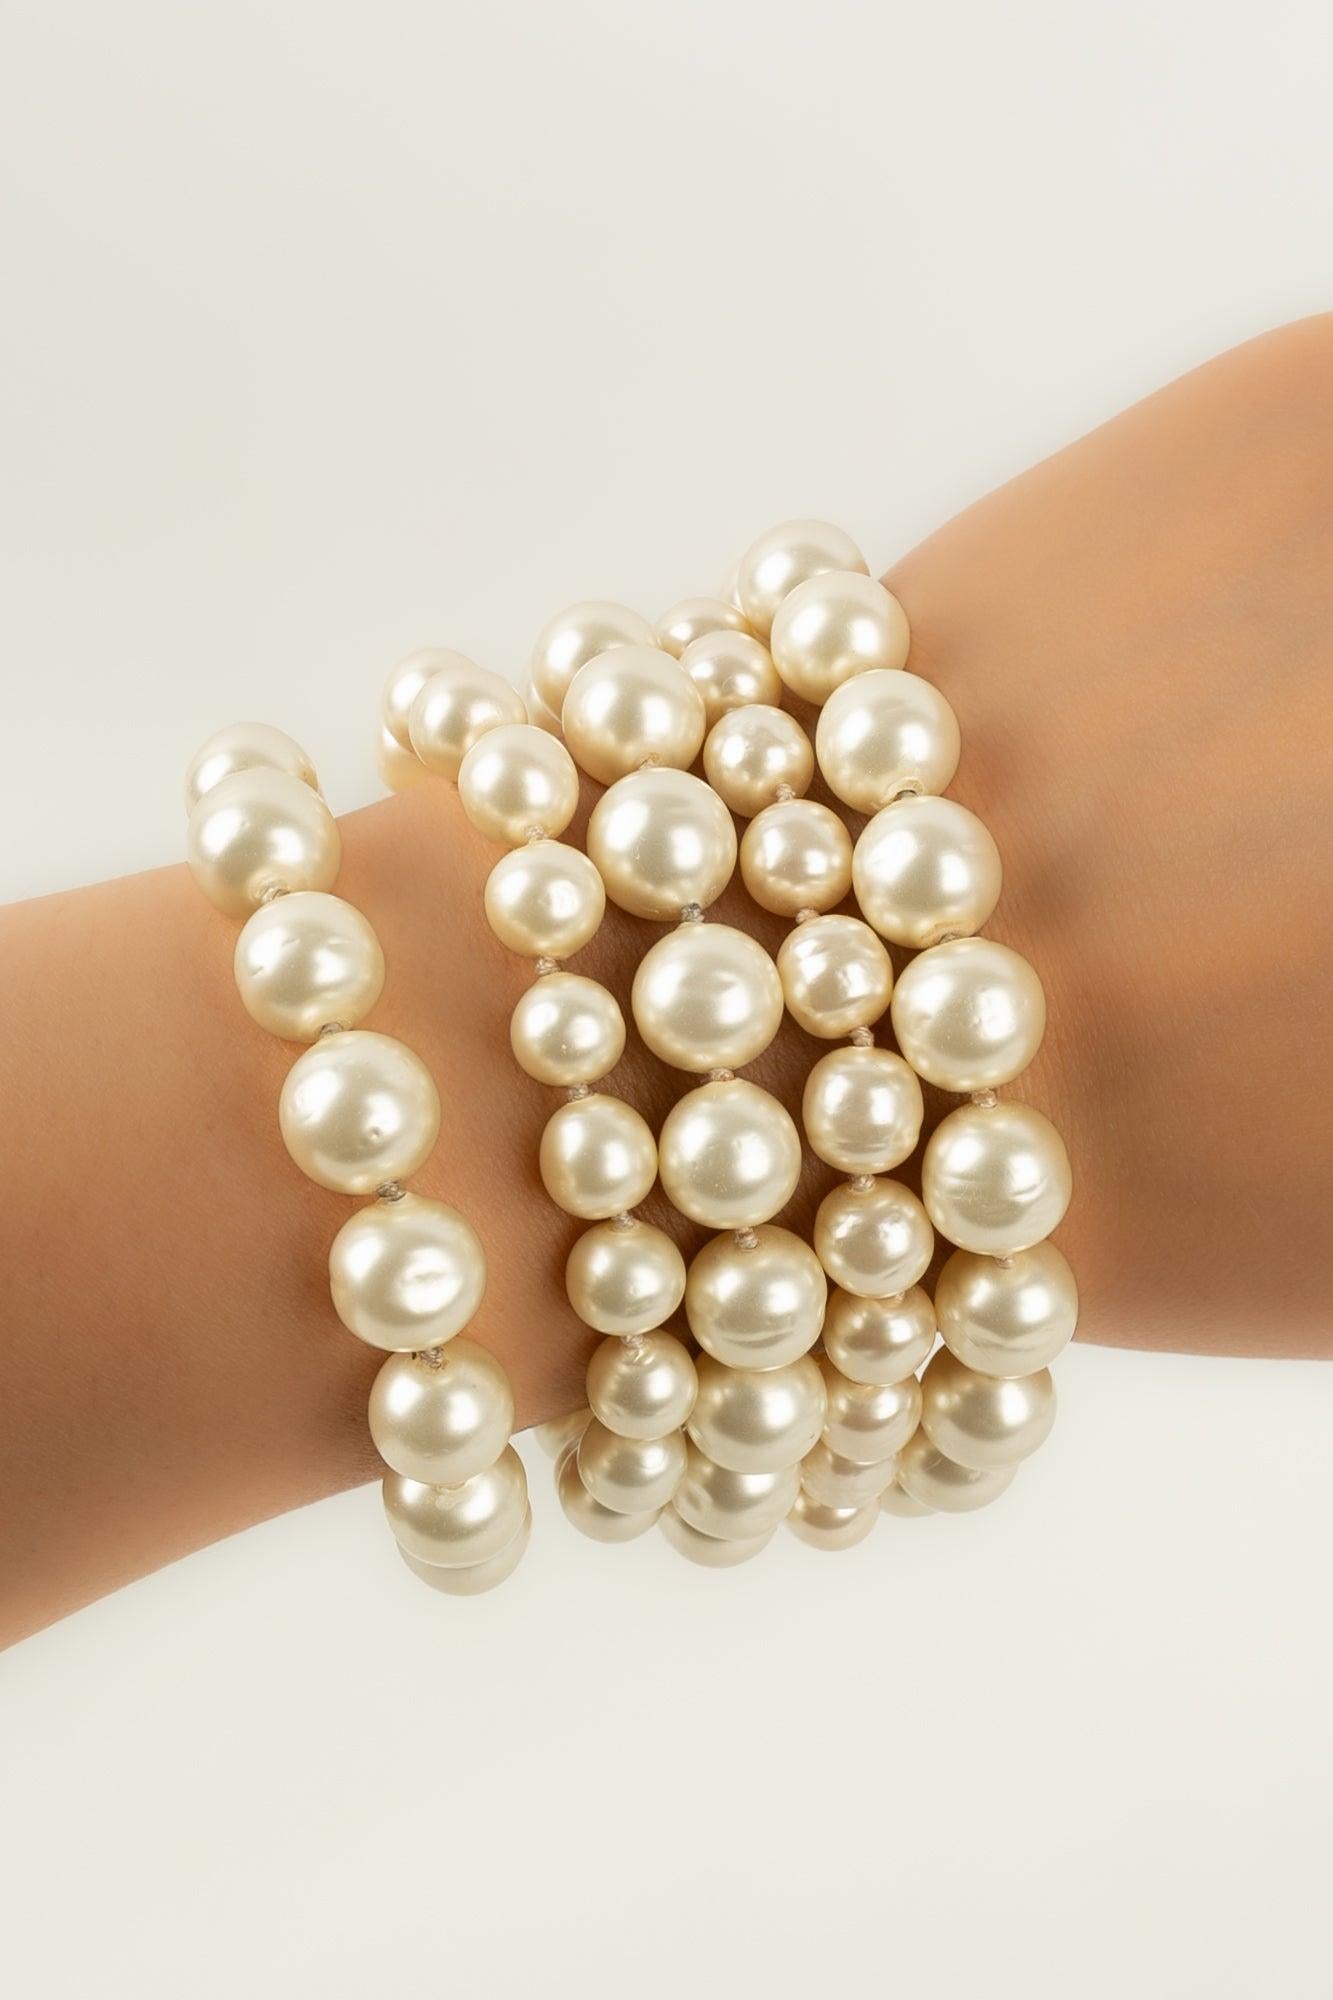 Chanel Bracelet with Pearly Beads and a Fastener in Golden Metal, 1980s For Sale 3